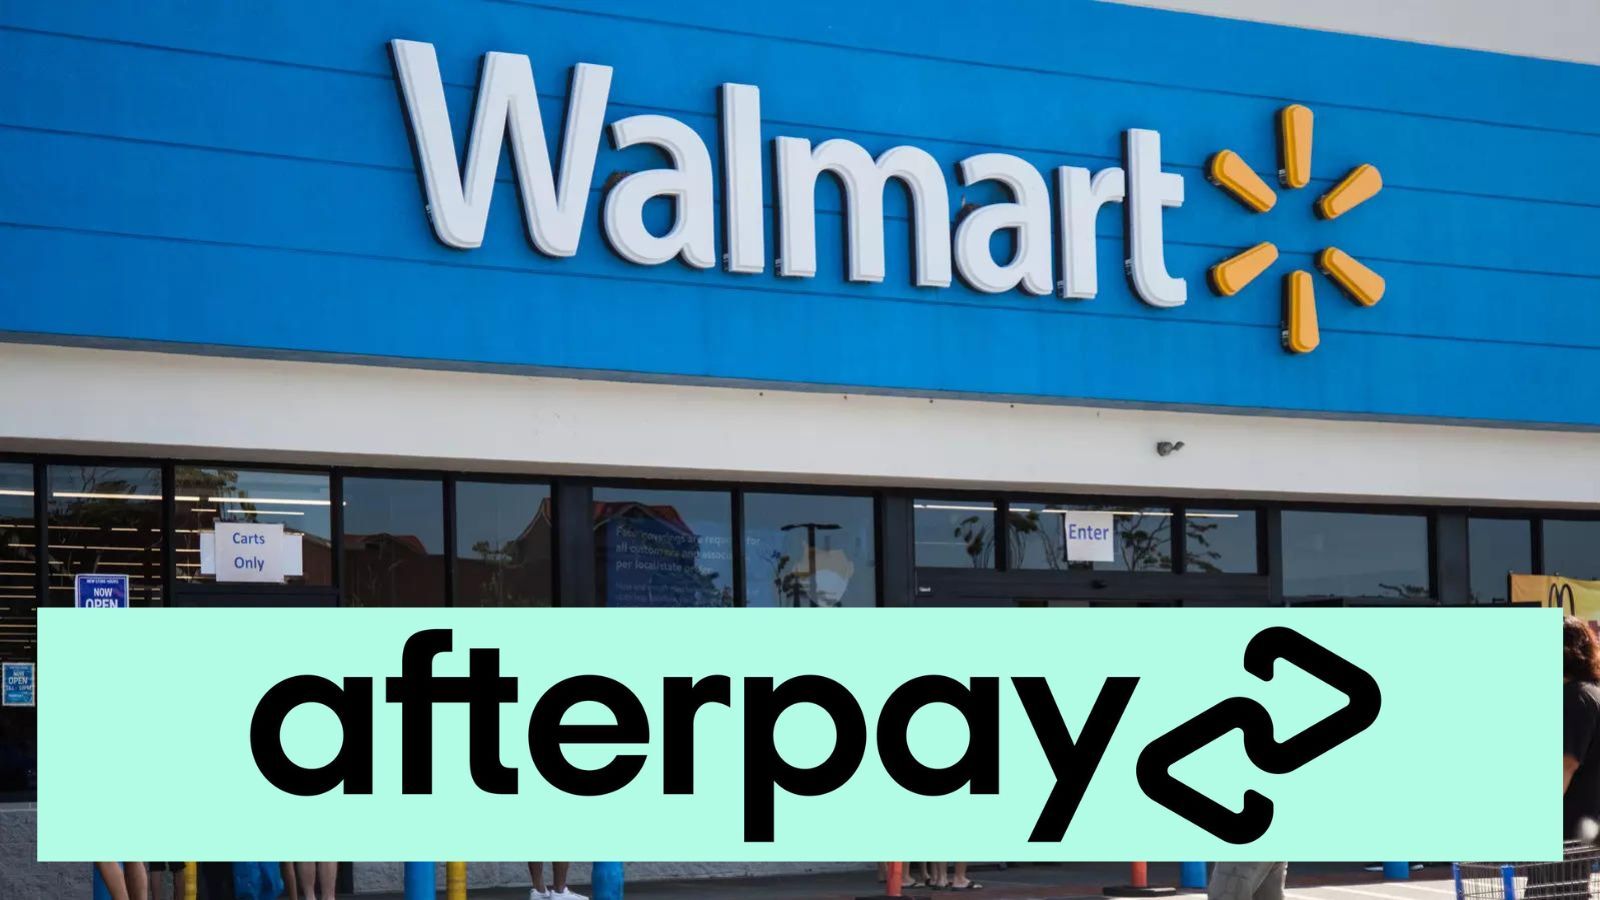 Does Walmart Accept Afterpay? (No, But There Are Other "Buy Now, Pay Later" Services)